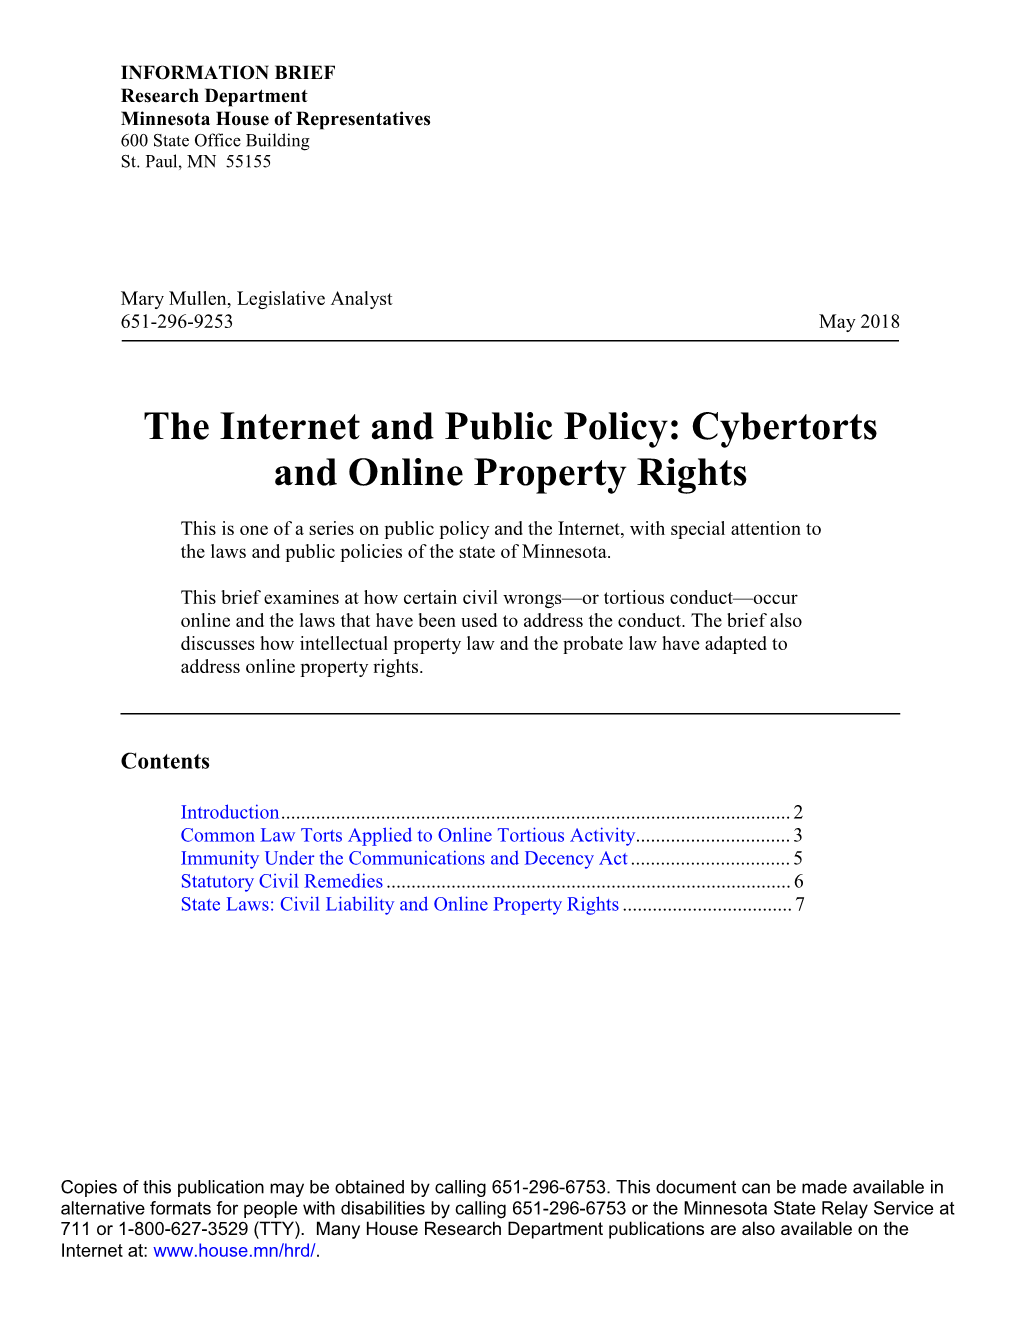 The Internet and Public Policy: Cybertorts and Online Property Rights